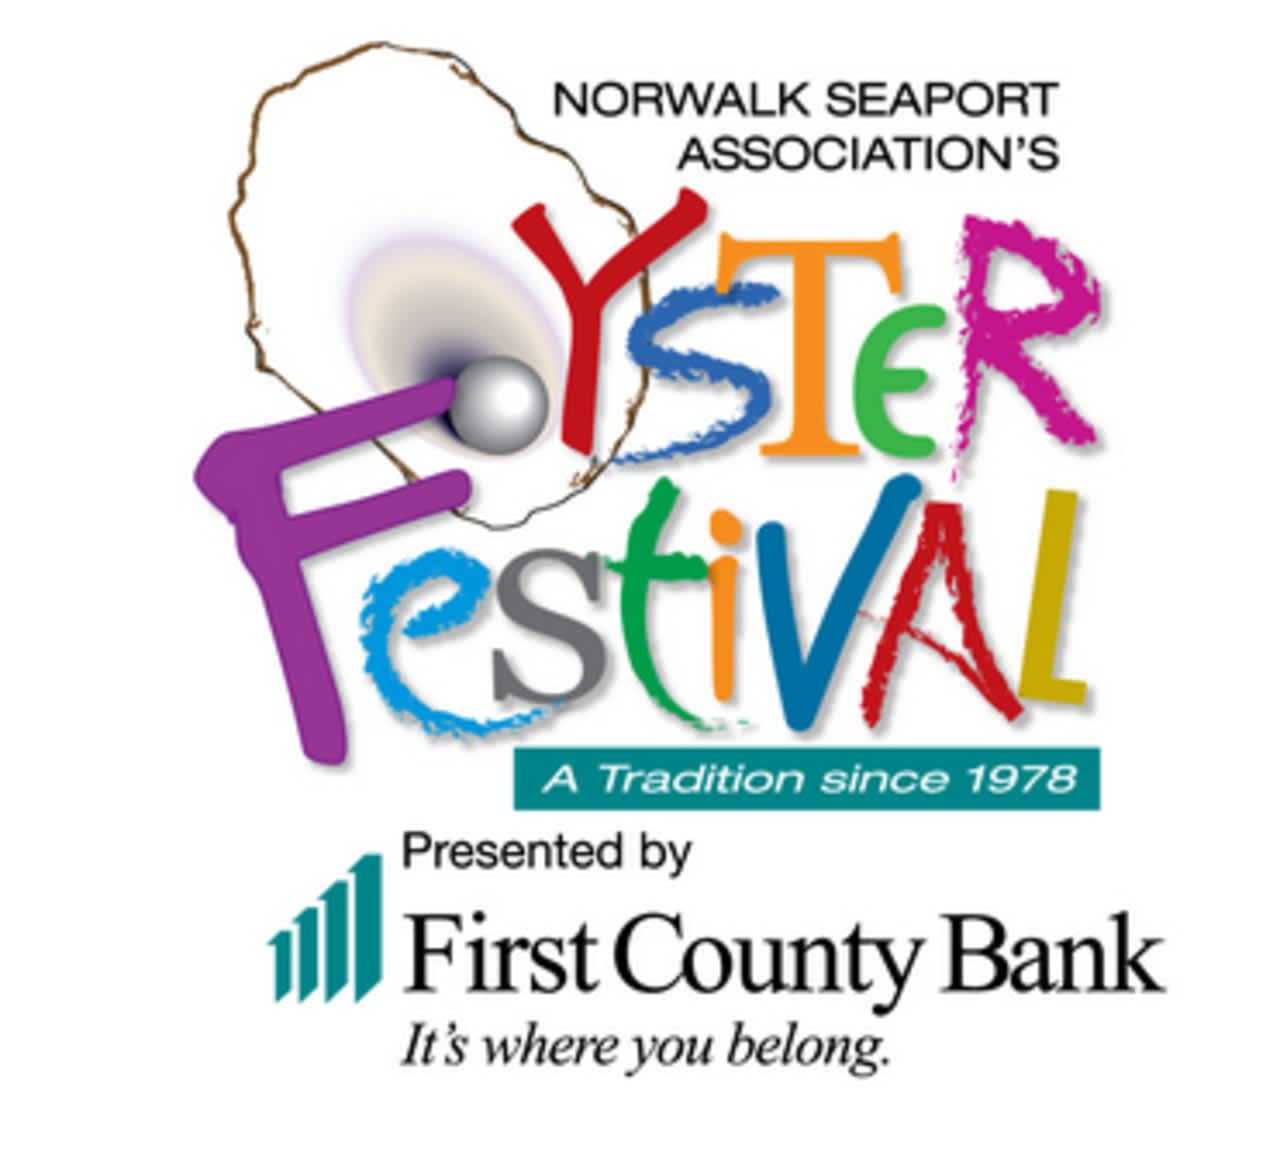 The 42nd Annual Oyster Festival will be held Friday, Sept. 6 to Sunday, Sept. 8 at Veteran's Park in East Norwalk.